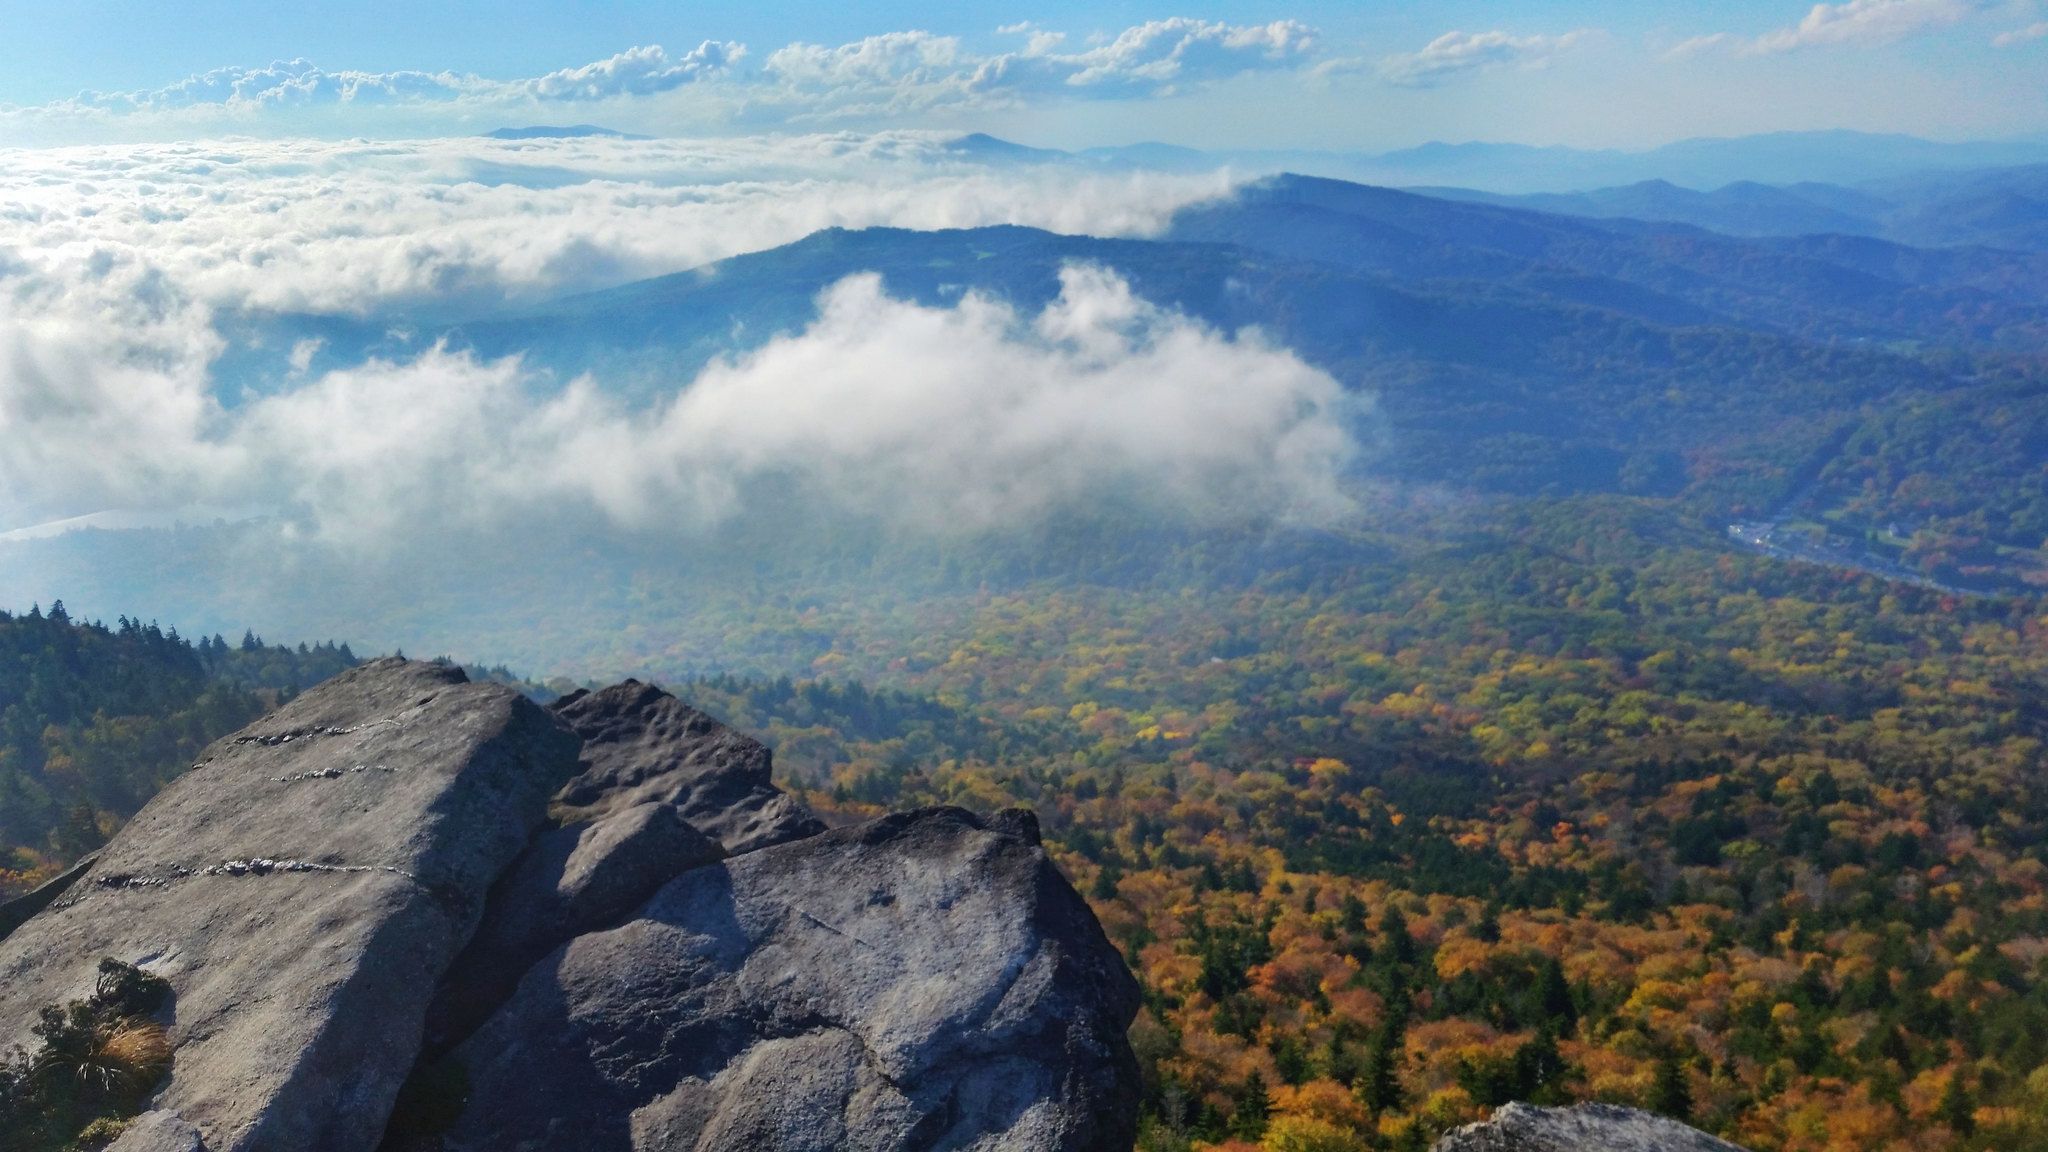 OC] [2048x1152] Grandfather Mountain, NC in early Autumn, looking West